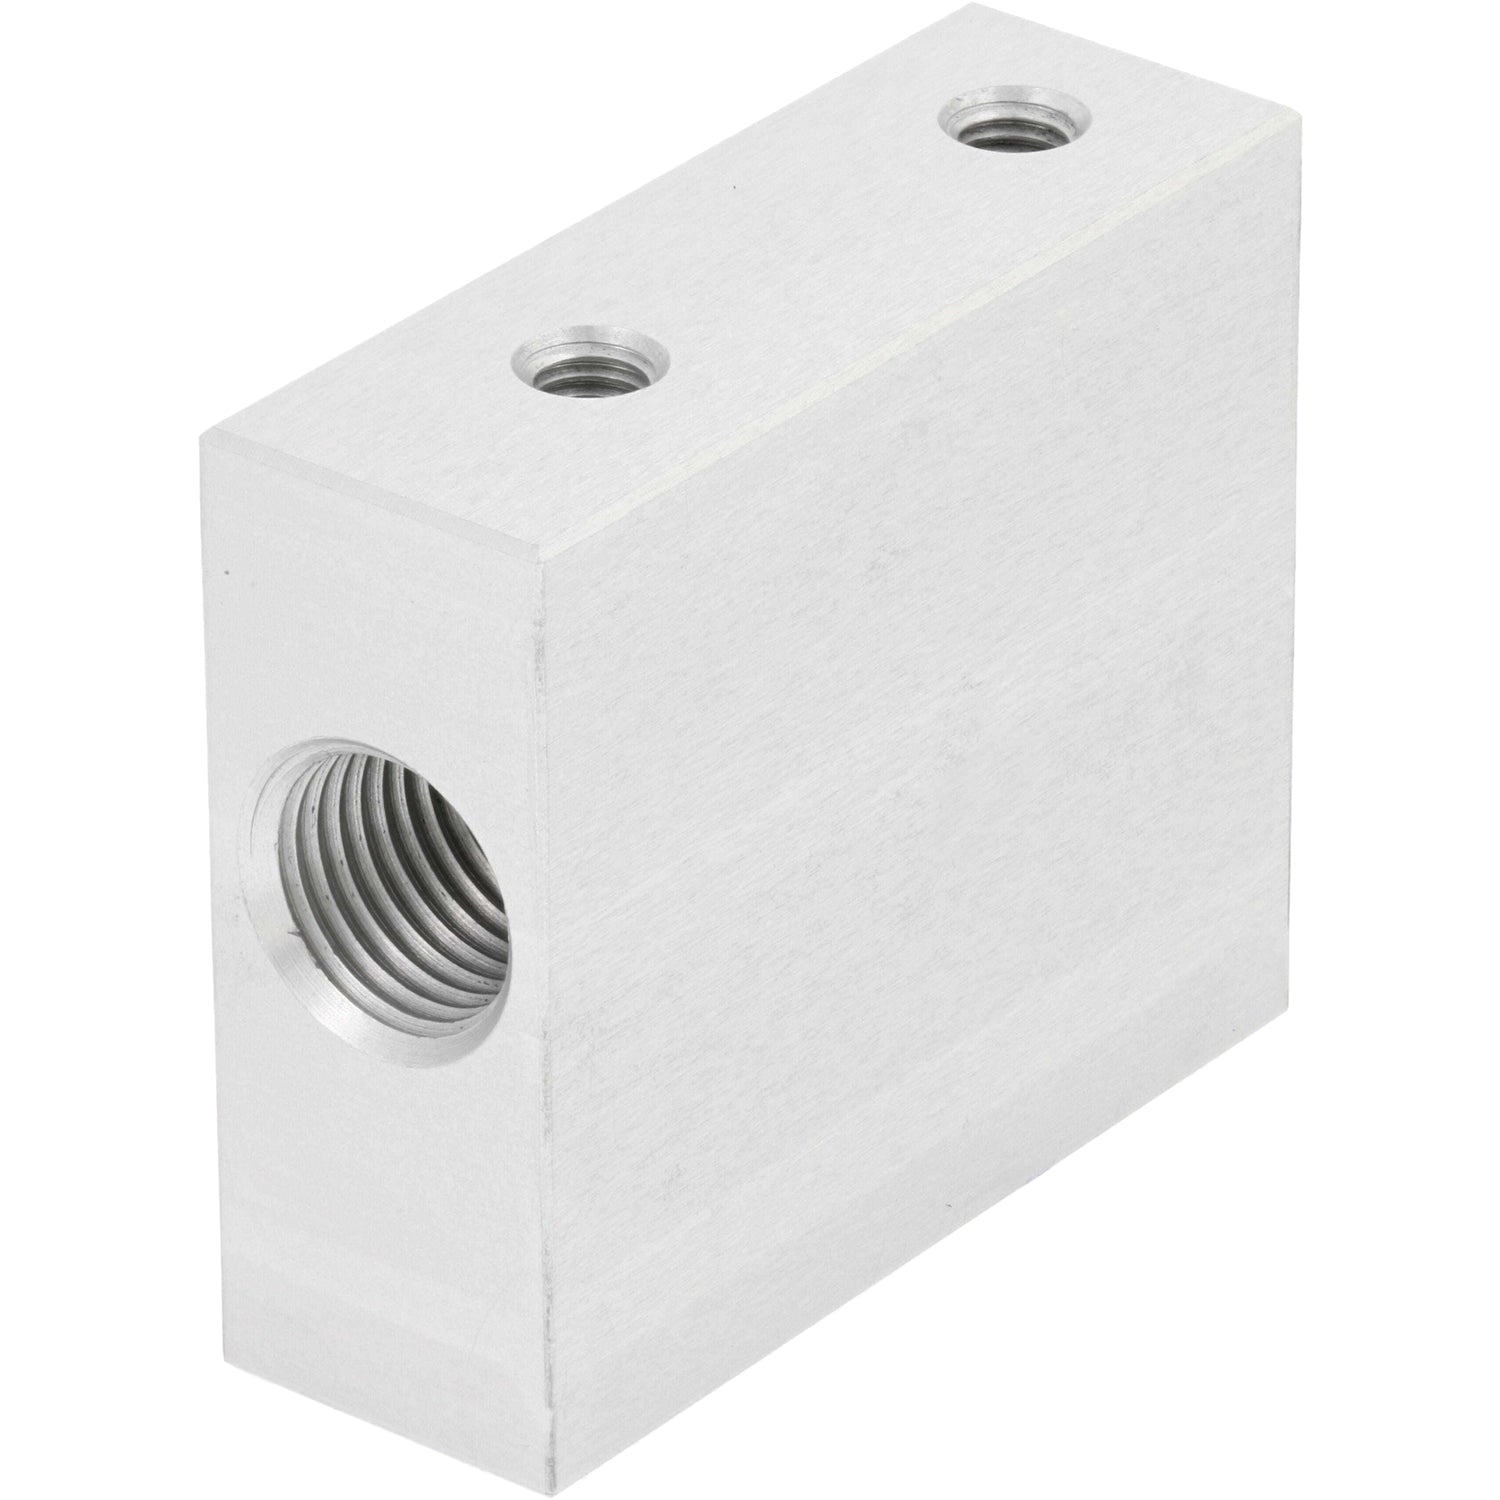 Rectangular hard anodized aluminum block. Two smaller threaded holes are on the top surface and one larger threaded hole is on the front surface. Part shown on white background.